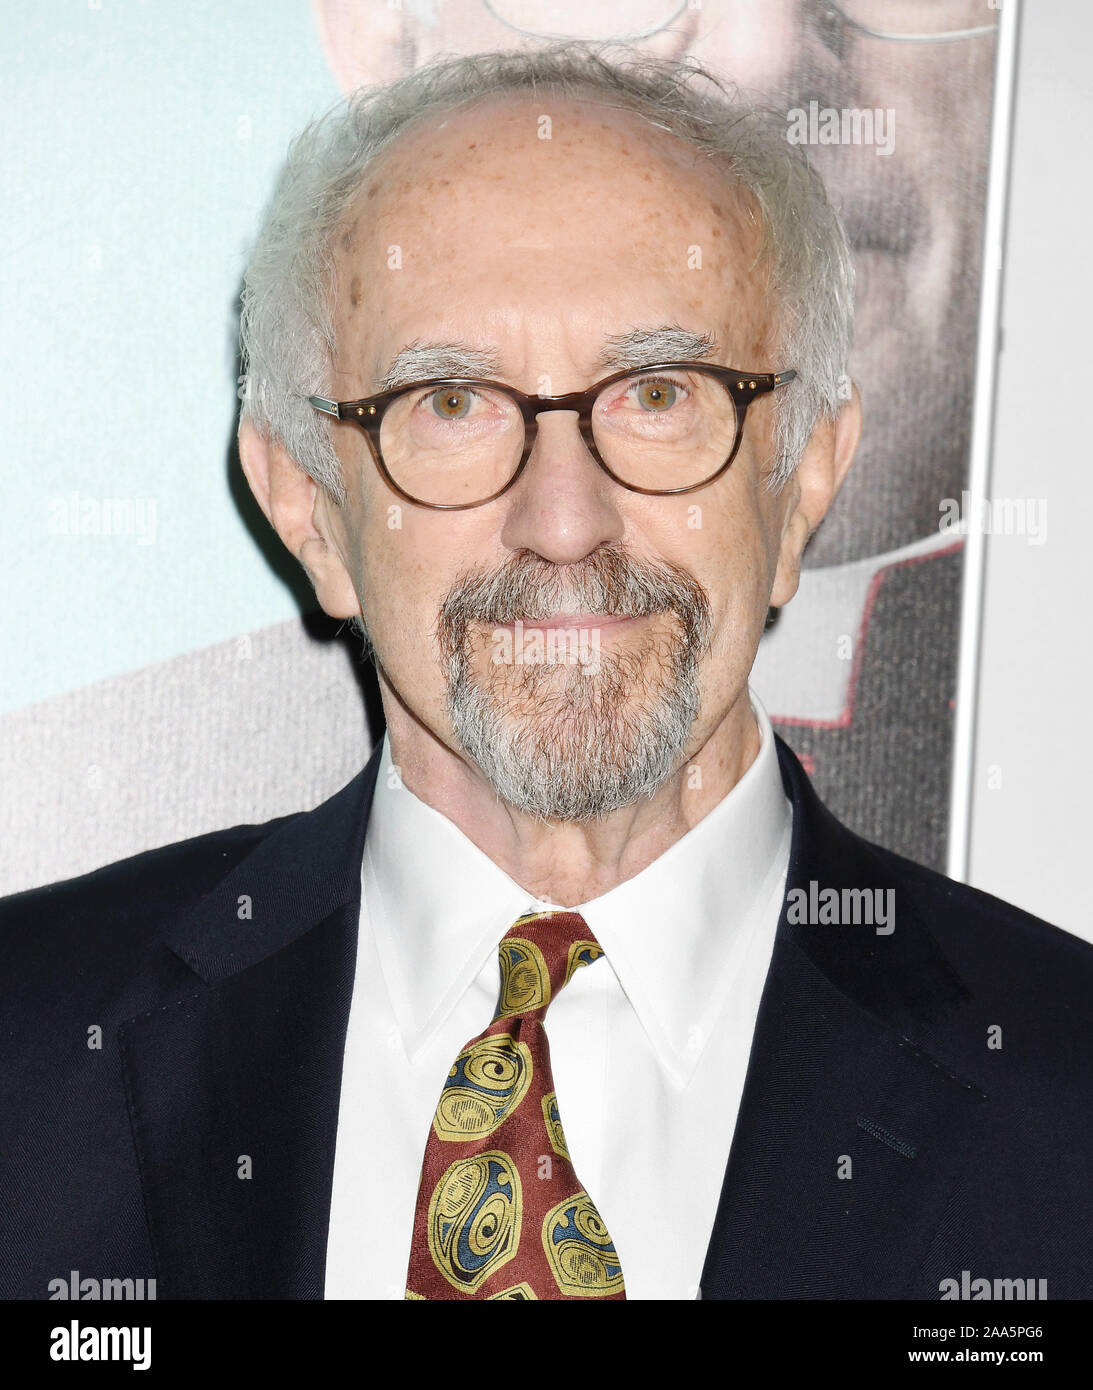 HOLLYWOOD, CA - NOVEMBER 18: Jonathan Pryce attends "The Two Popes" premiere during AFI FEST 2019 presented by Audi at TCL Chinese Theatre on November 18, 2019 in Hollywood, California. Stock Photo